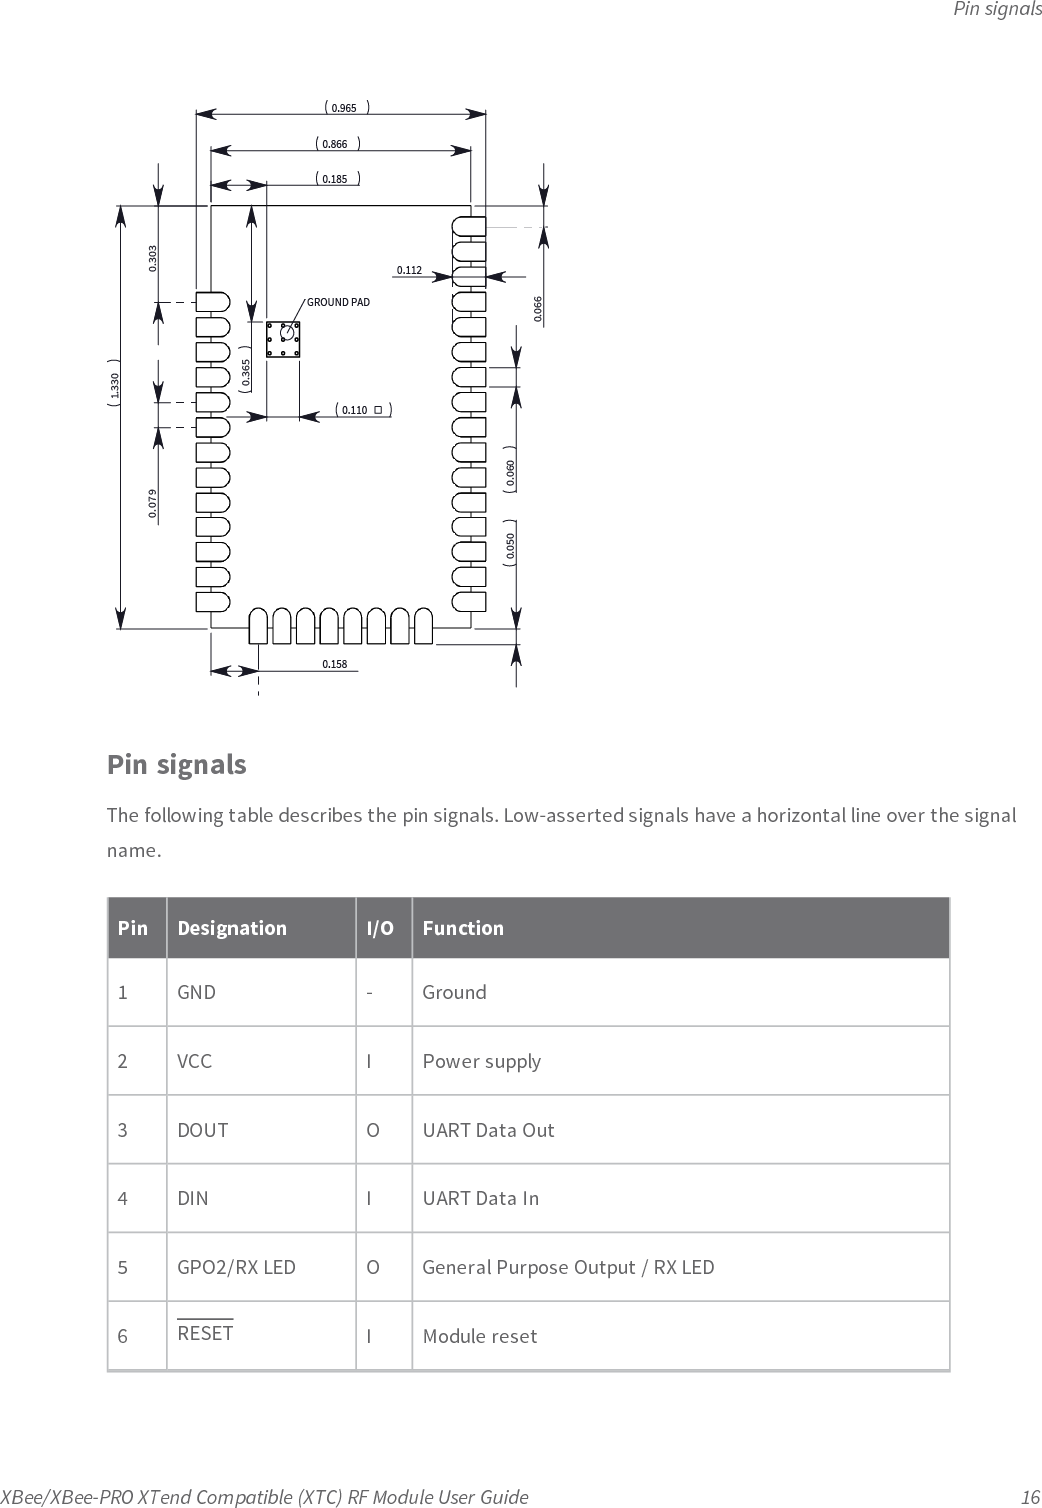 Pin signalsXBee/XBee-PRO XTend Compatible (XTC) RF Module User Guide 16Pin signalsThe following table describes the pin signals. Low-asserted signals have a horizontal line over the signalname.Pin Designation I/O Function1 GND - Ground2 VCC I Power supply3 DOUT O UART Data Out4 DIN I UART Data In5 GPO2/RX LED O General Purpose Output / RX LED6RESET I Module reset